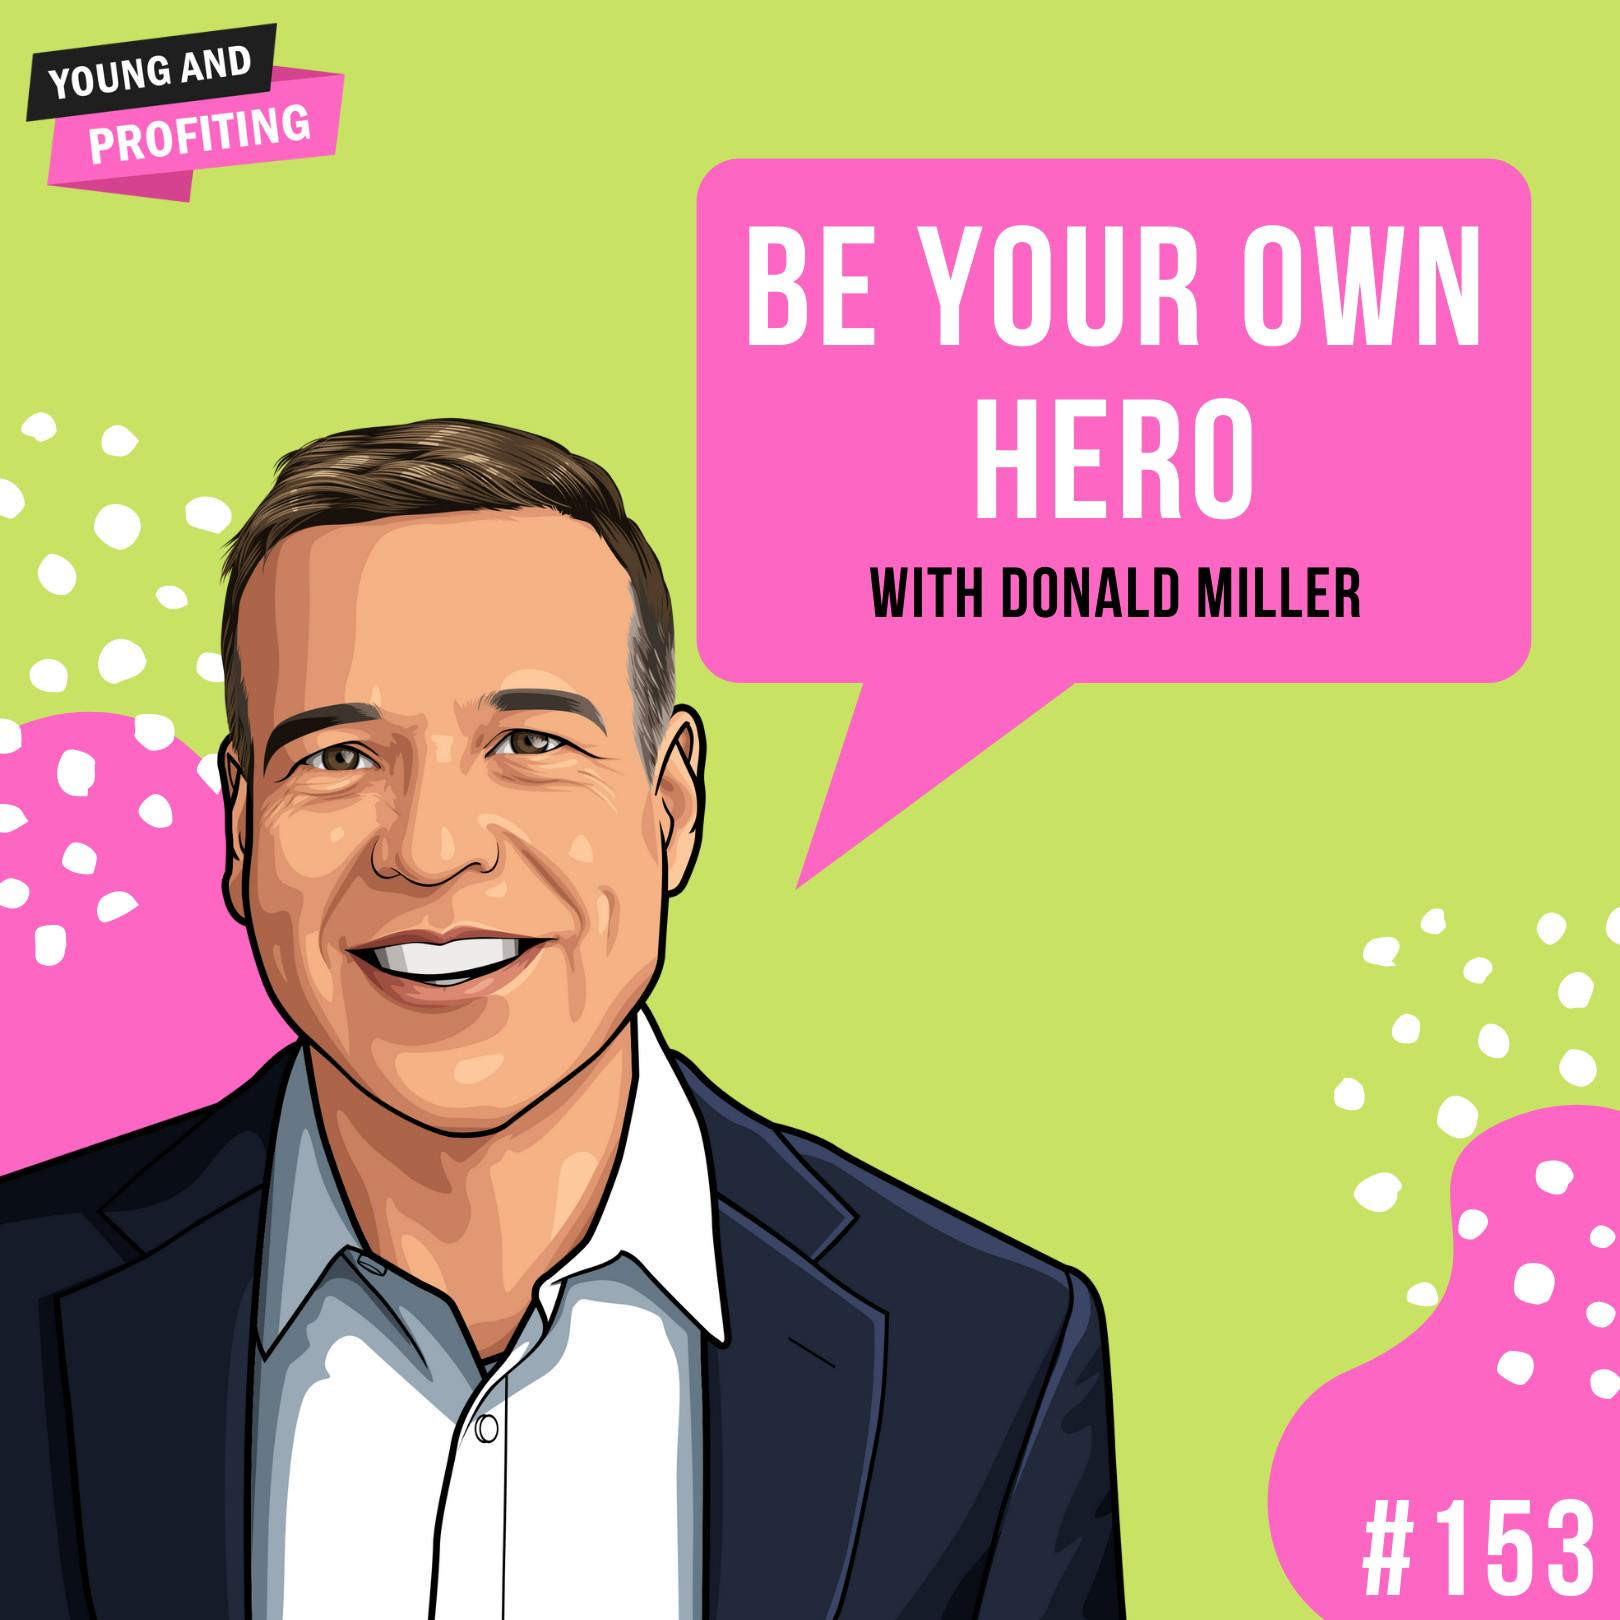 Donald Miller: Be Your Own Hero | E153 by Hala Taha | YAP Media Network